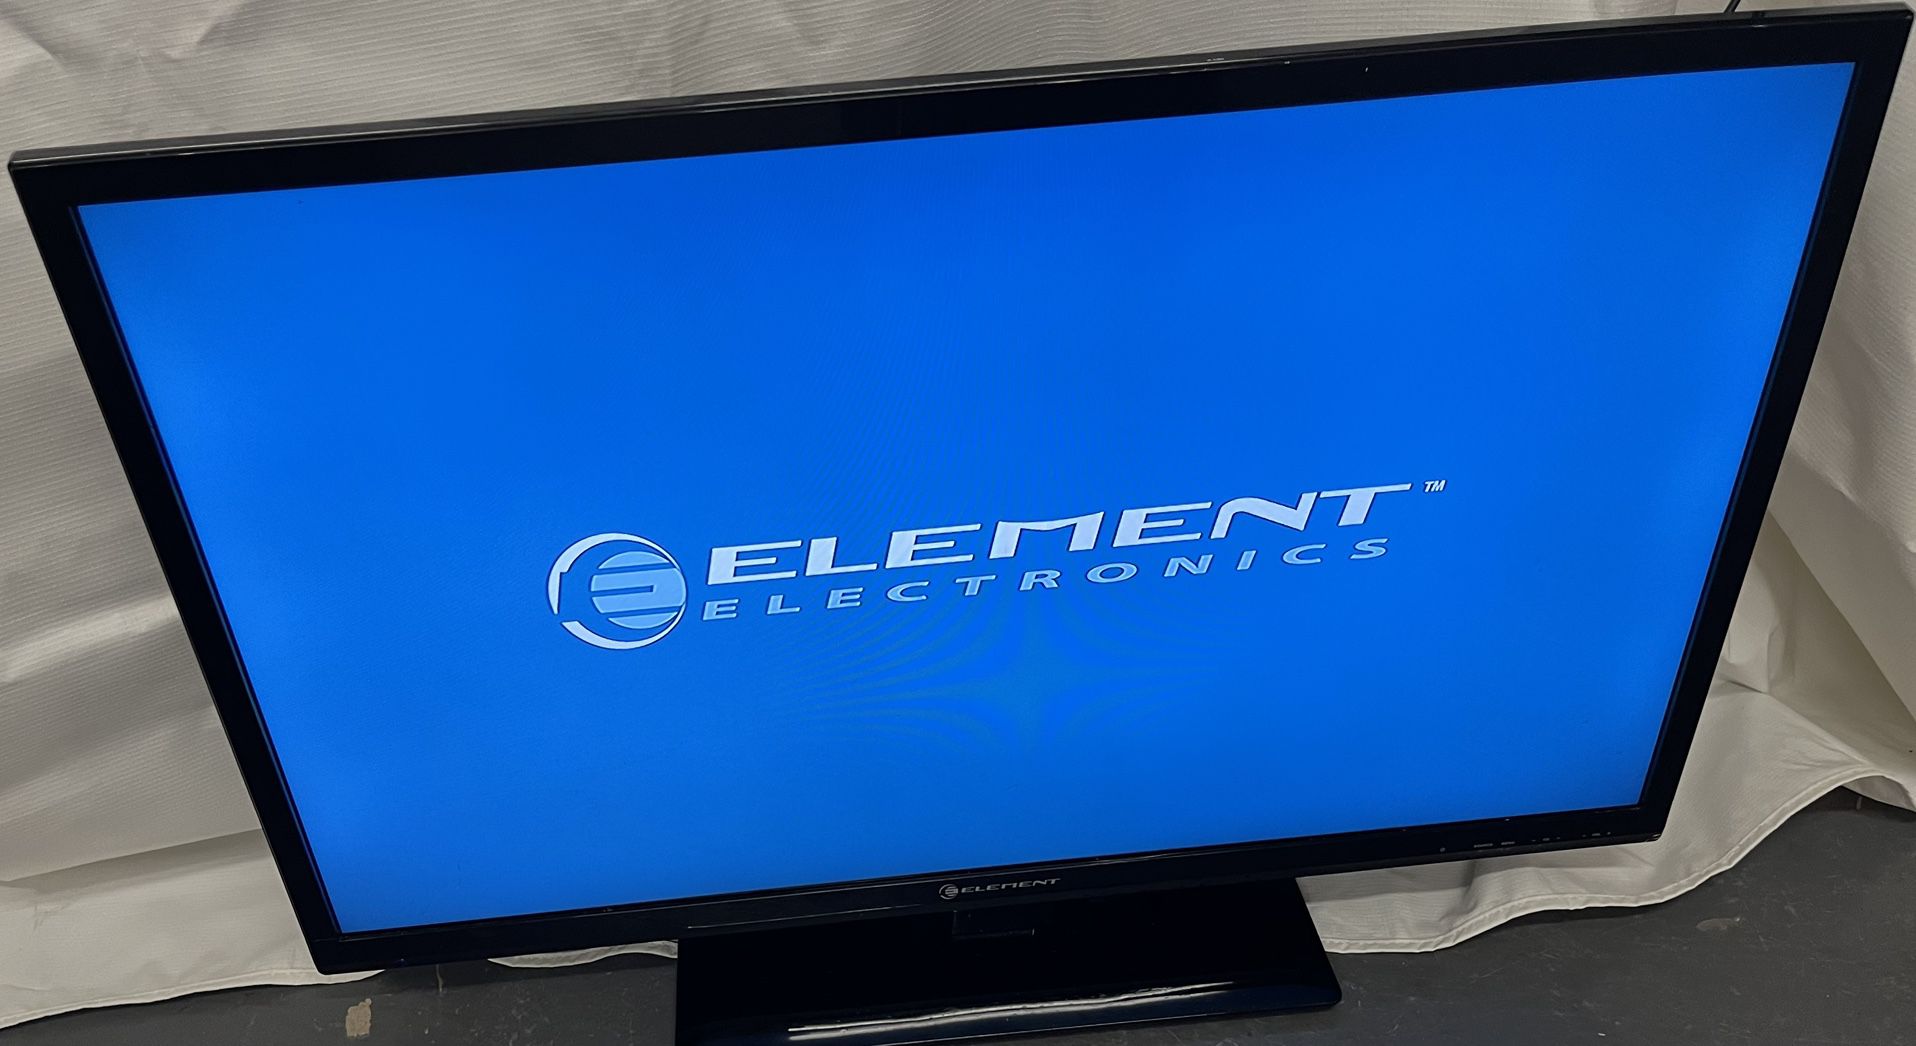 Element Electronic tv ( not smart), 32 inches, not remote.$15